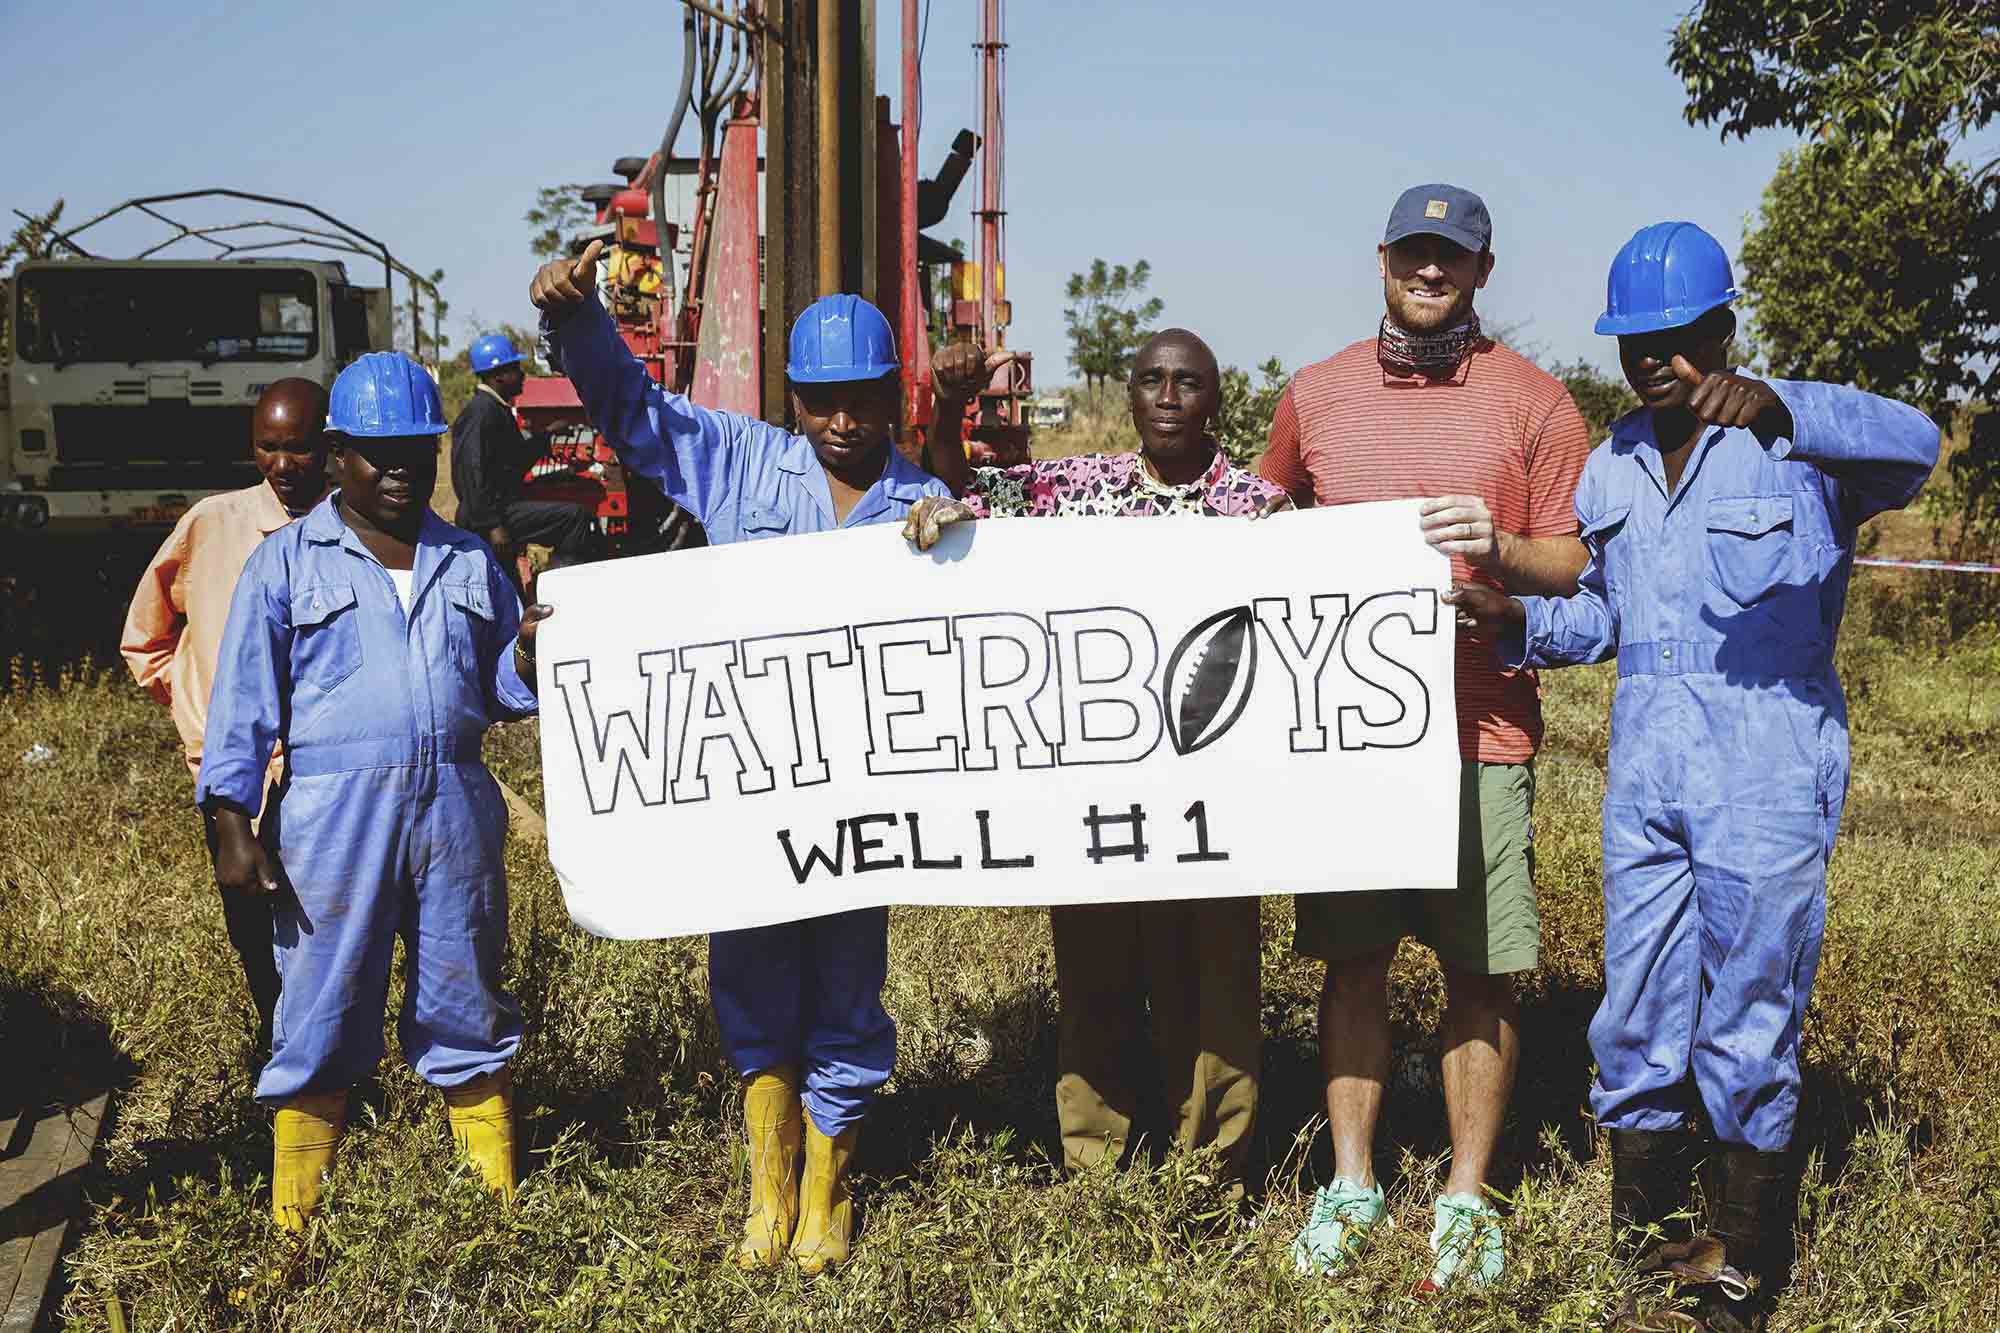 Chris long stands with a group of men all holding a sign that reads Waterboys well #1